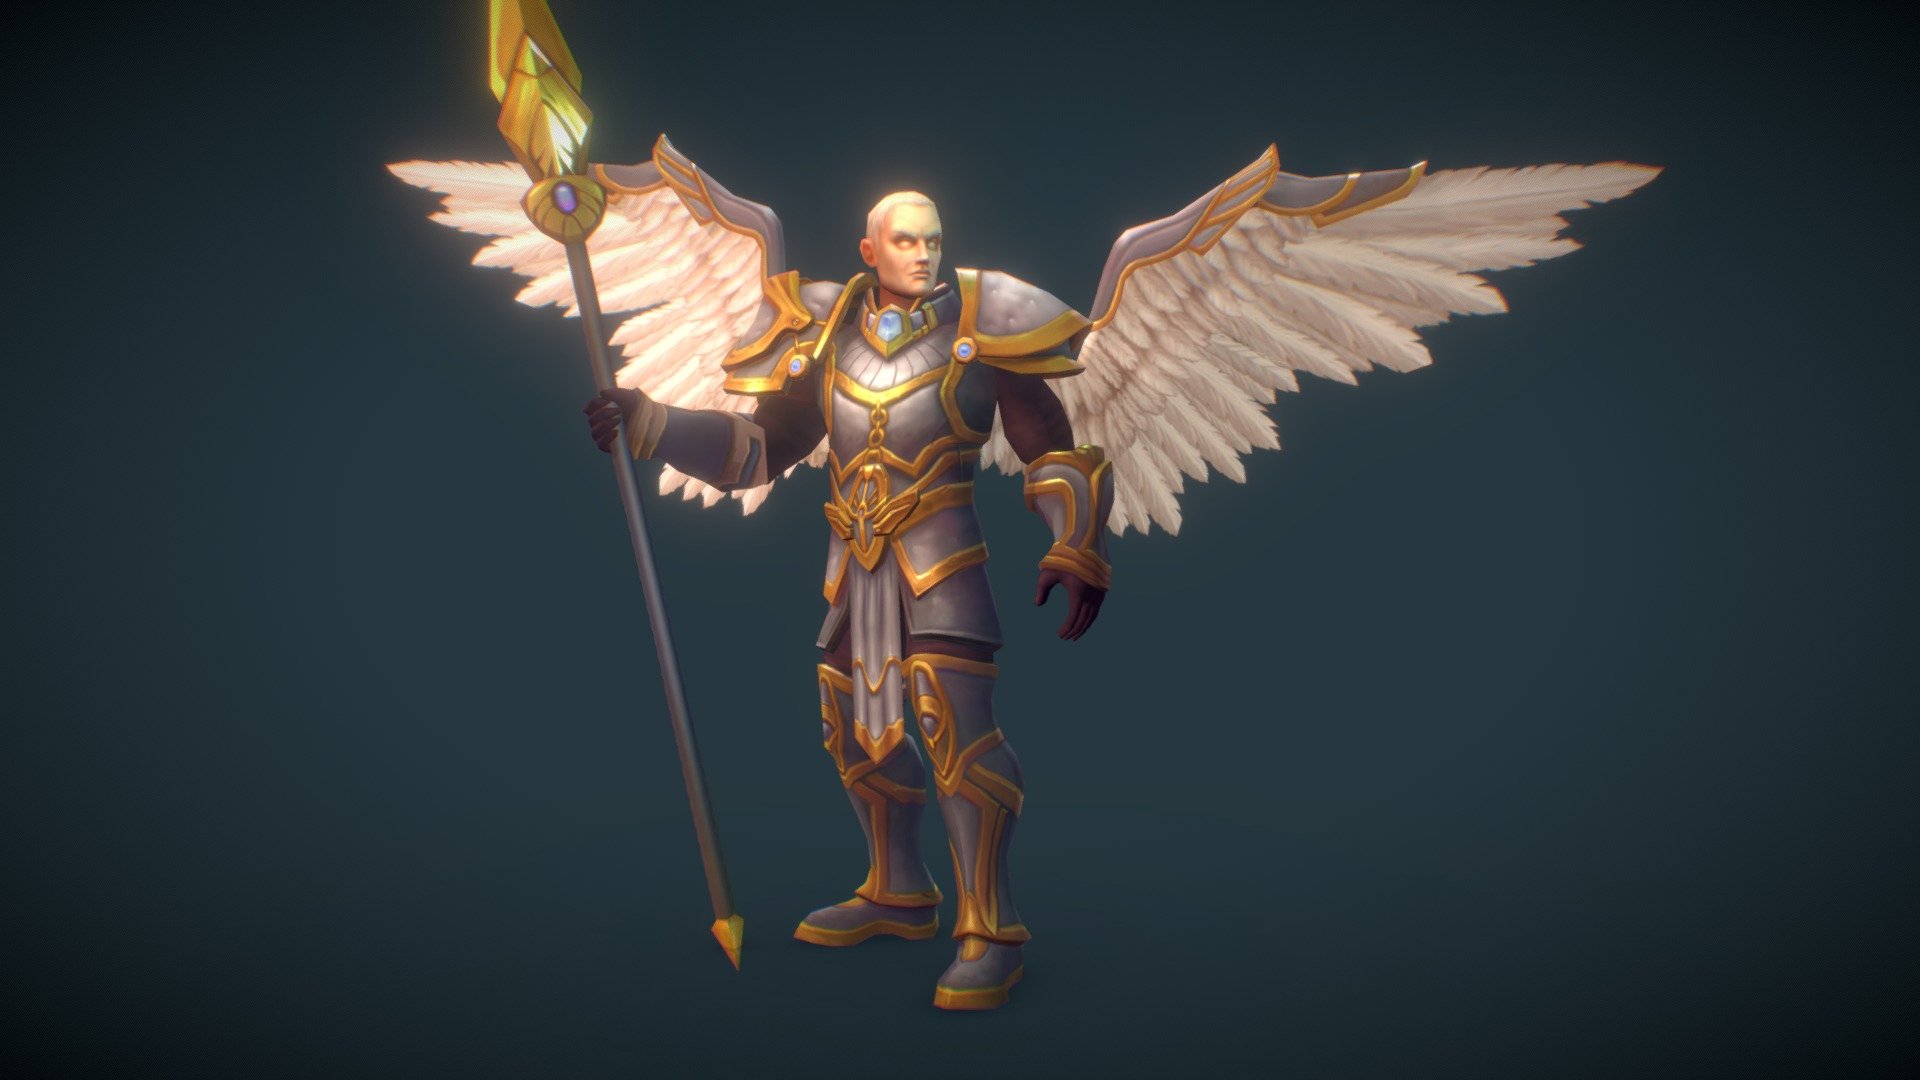 A hand painted angelic hero character suitable for VR, AR and mobile game development. He is rigged and ready for animations. Mechanim and mixamo work well 3d model